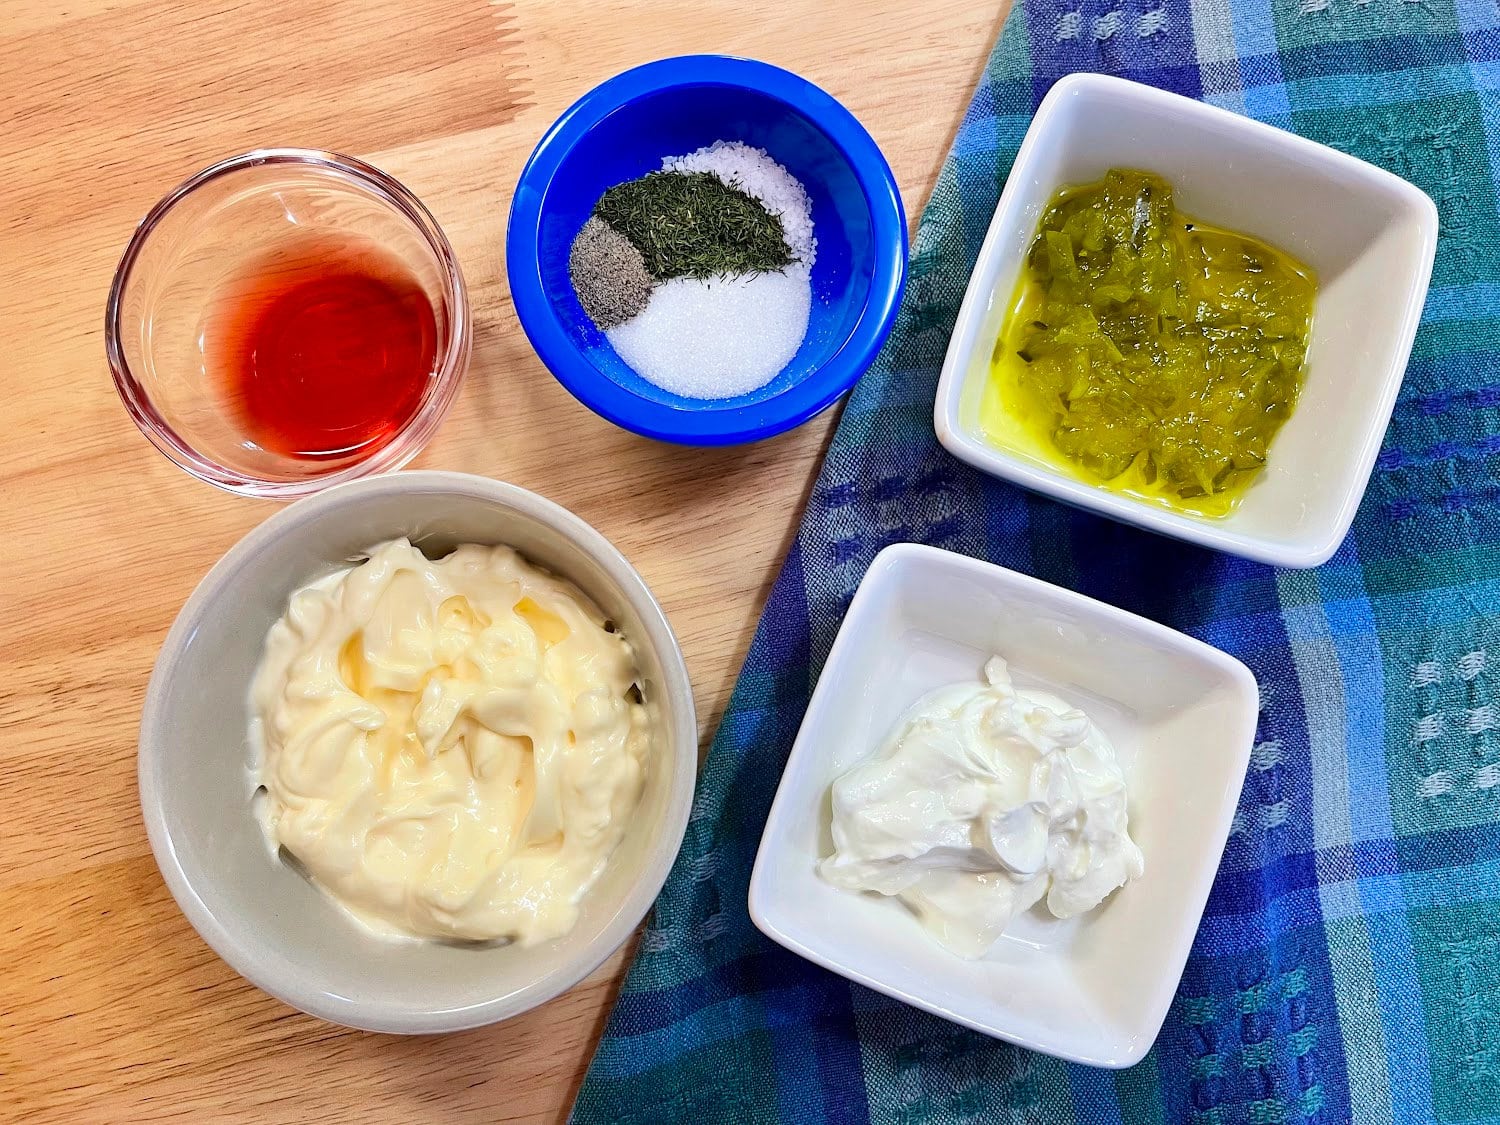 All the ingredients needed to make tartar sauce. 